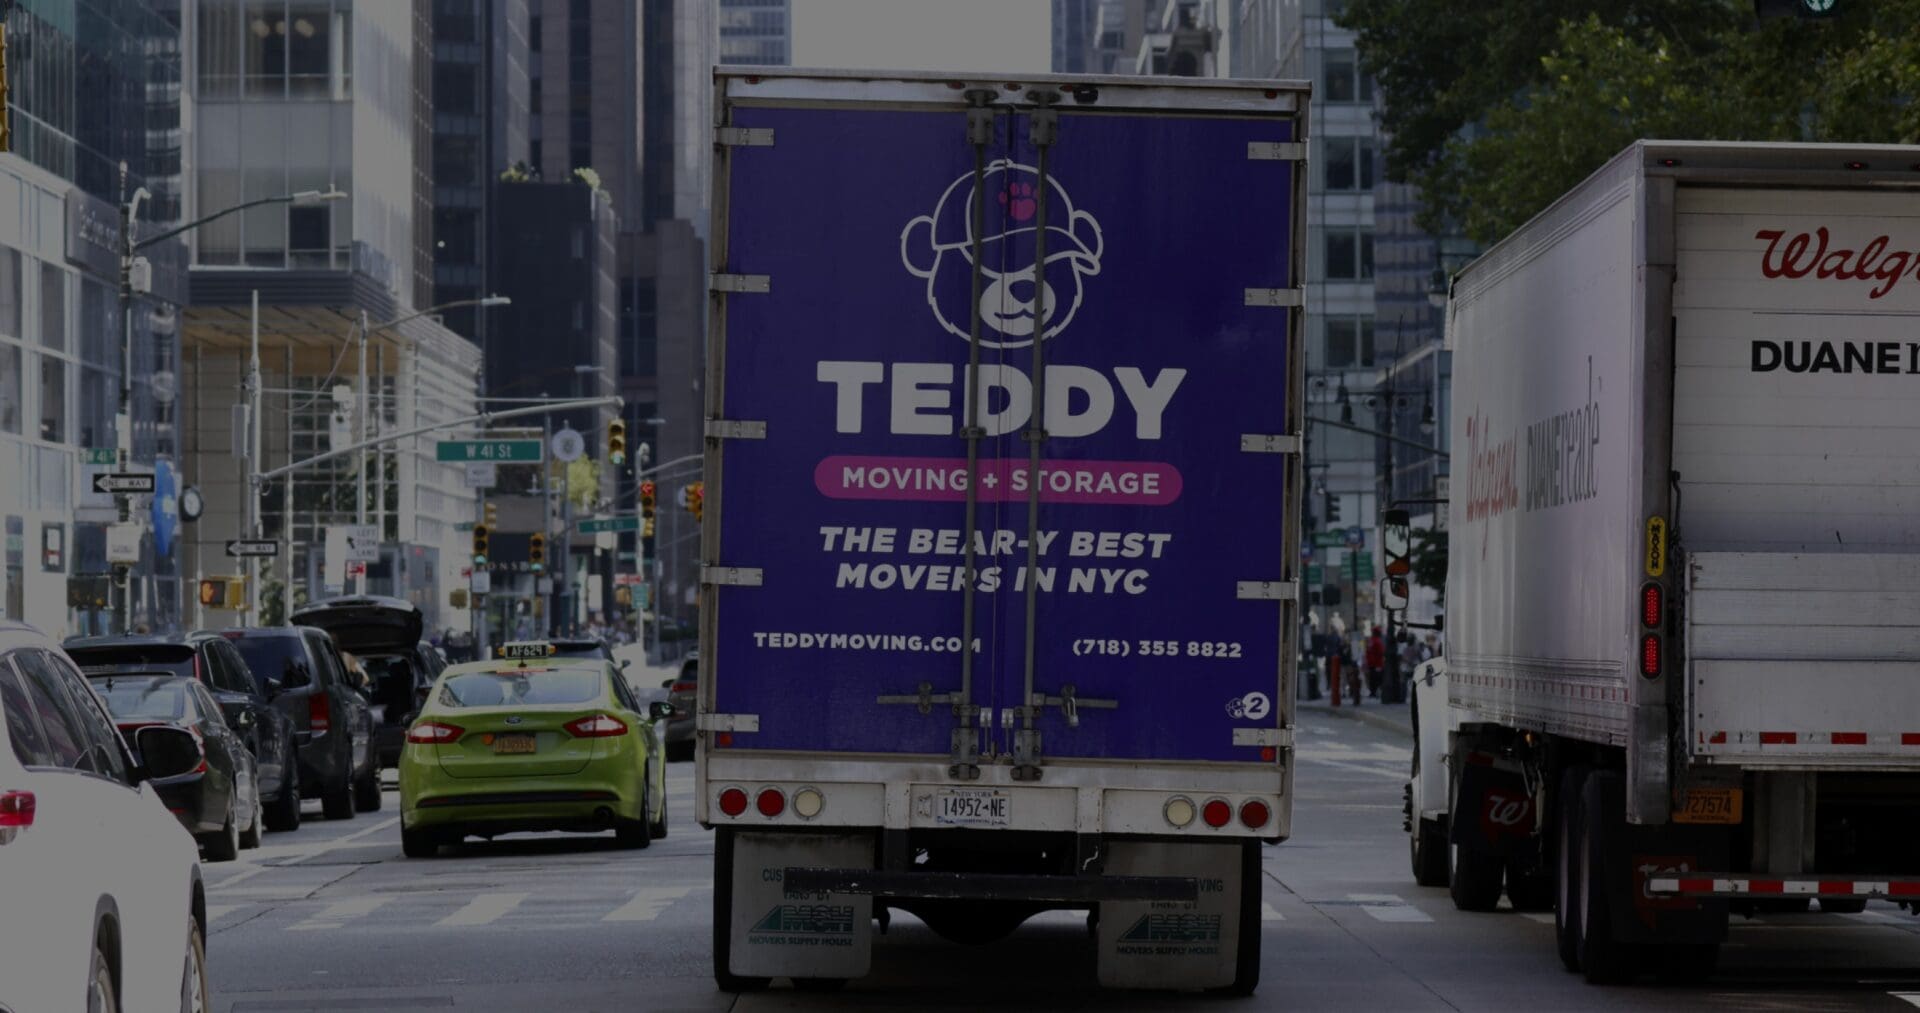 Teddy Moving & Storage truck in the streets of NYC